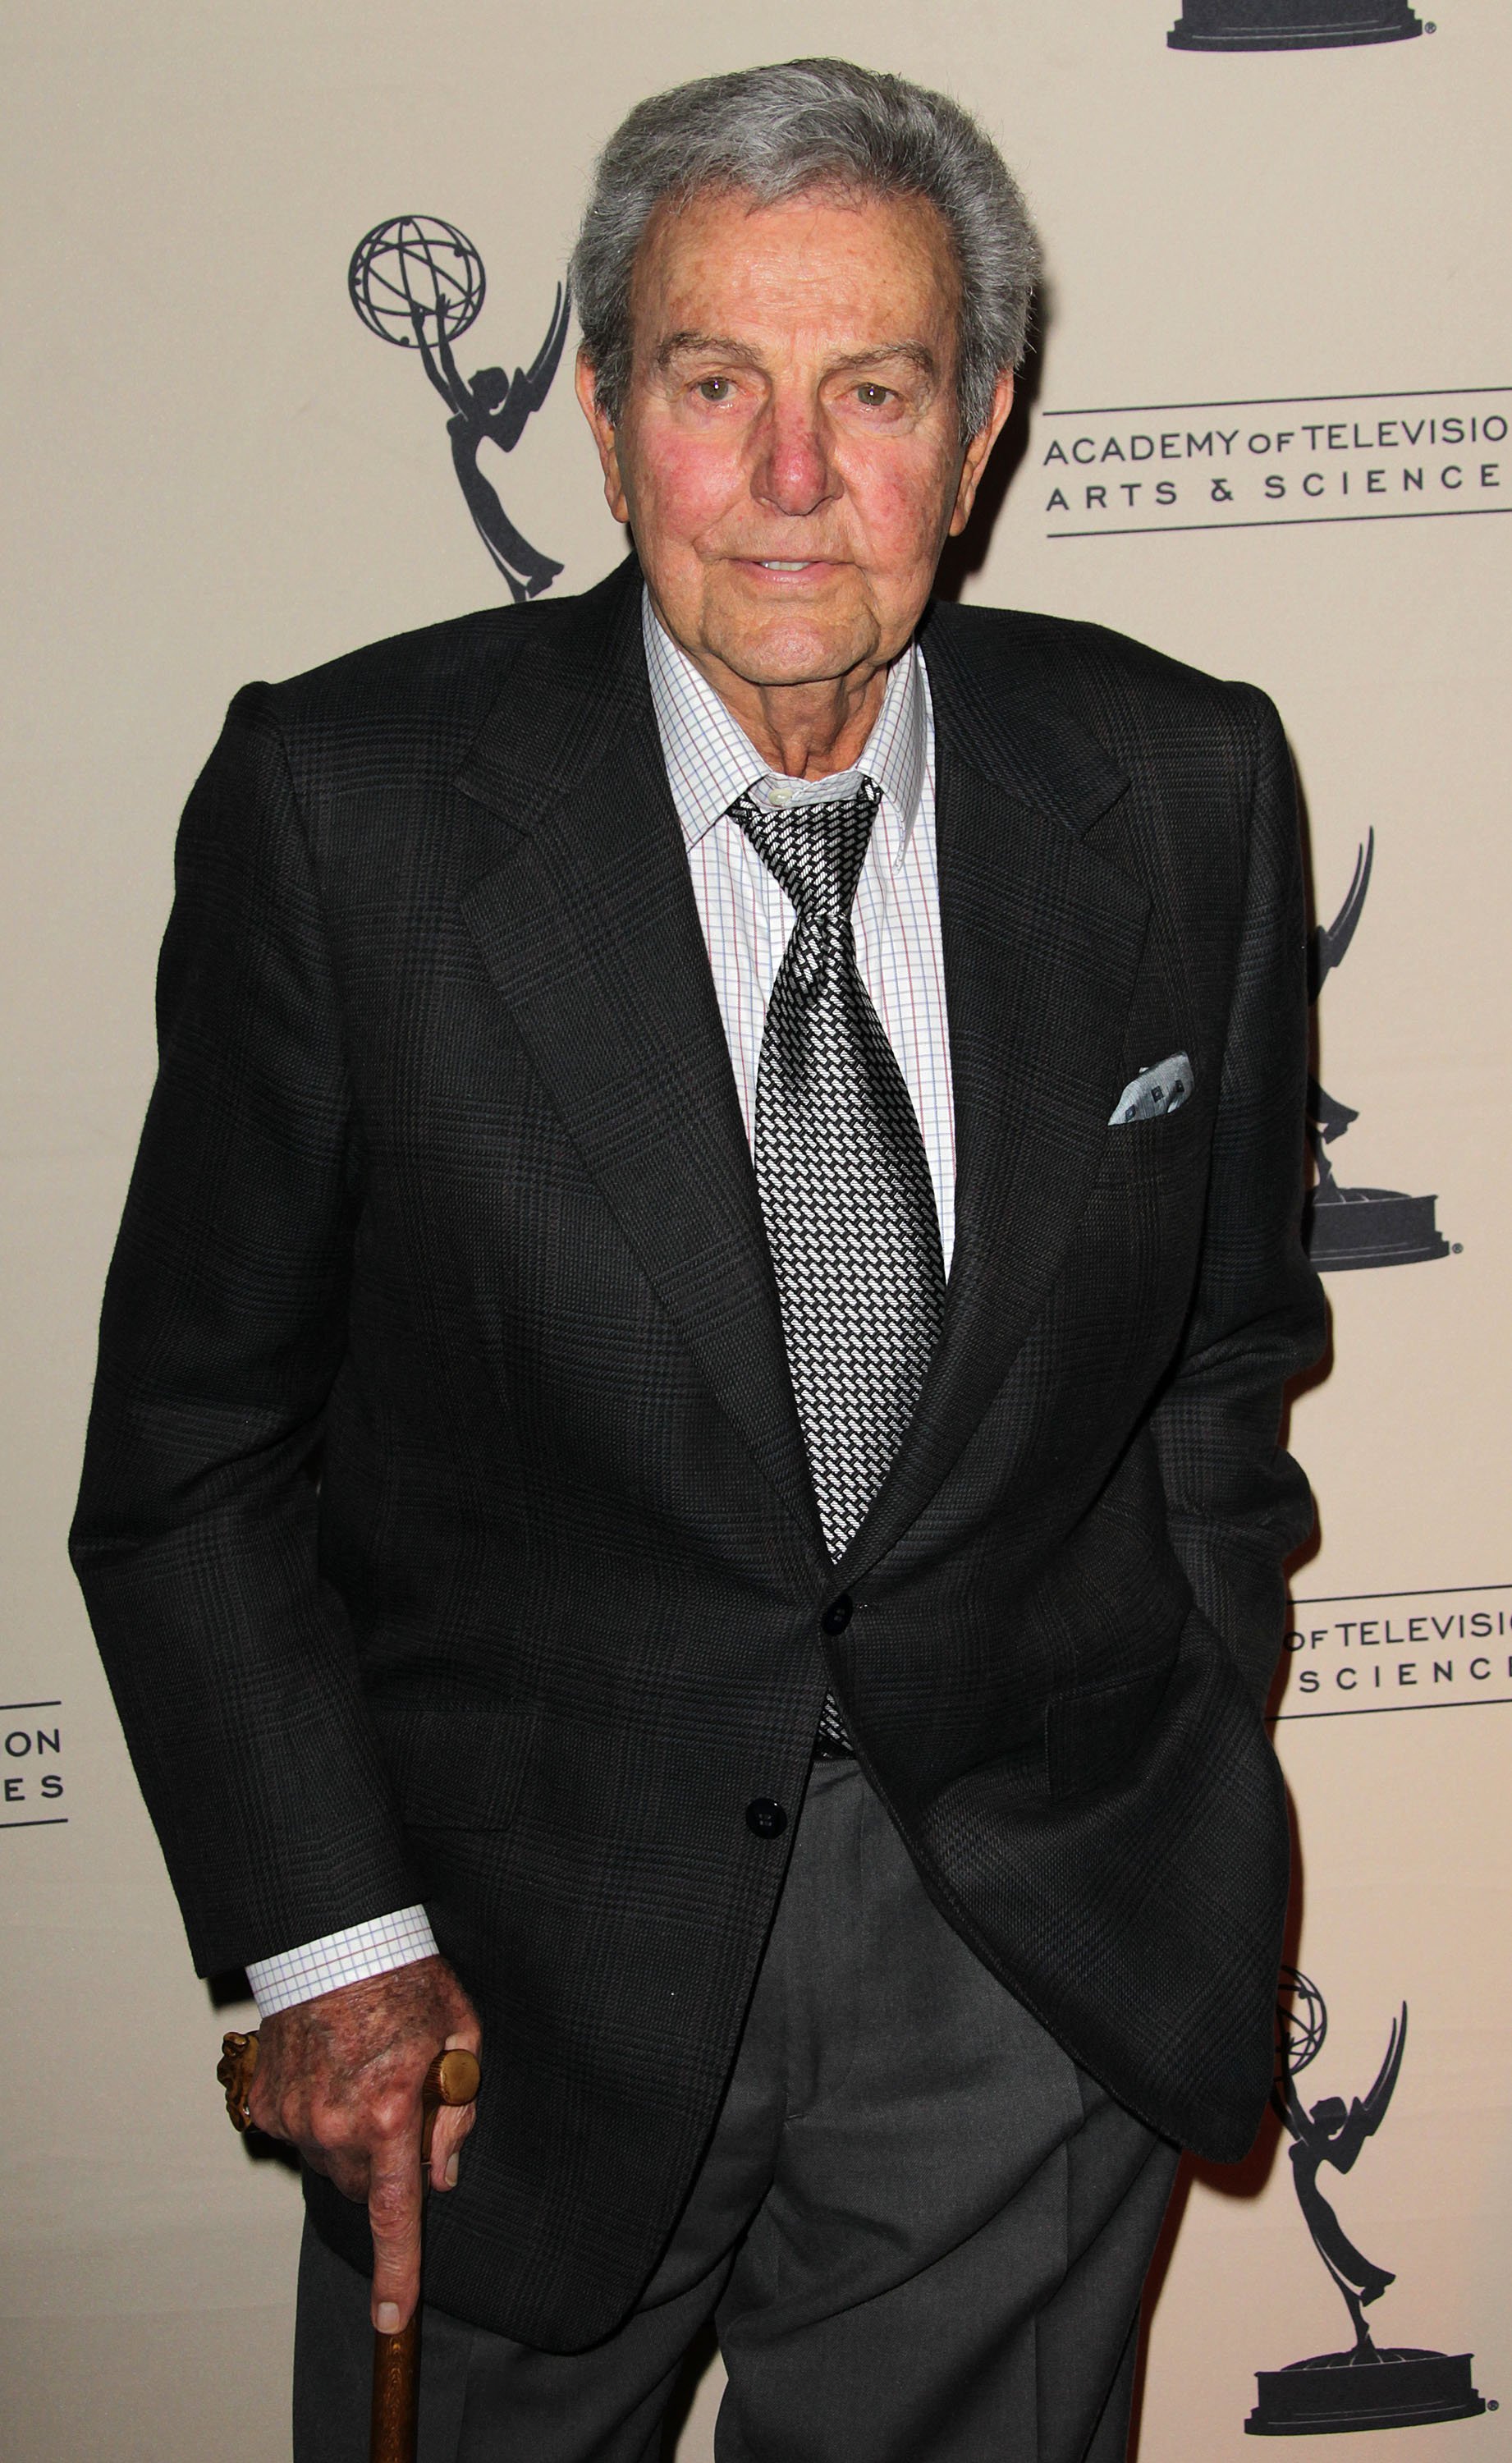 Actor Mike Connors attends the Academy of Television Arts and Sciences' Primetime Television Crimefighters panel discussion at the Leonard H Goldenson Theatre on November 1, 2010 in North Hollywood, California. | Source: Getty Images